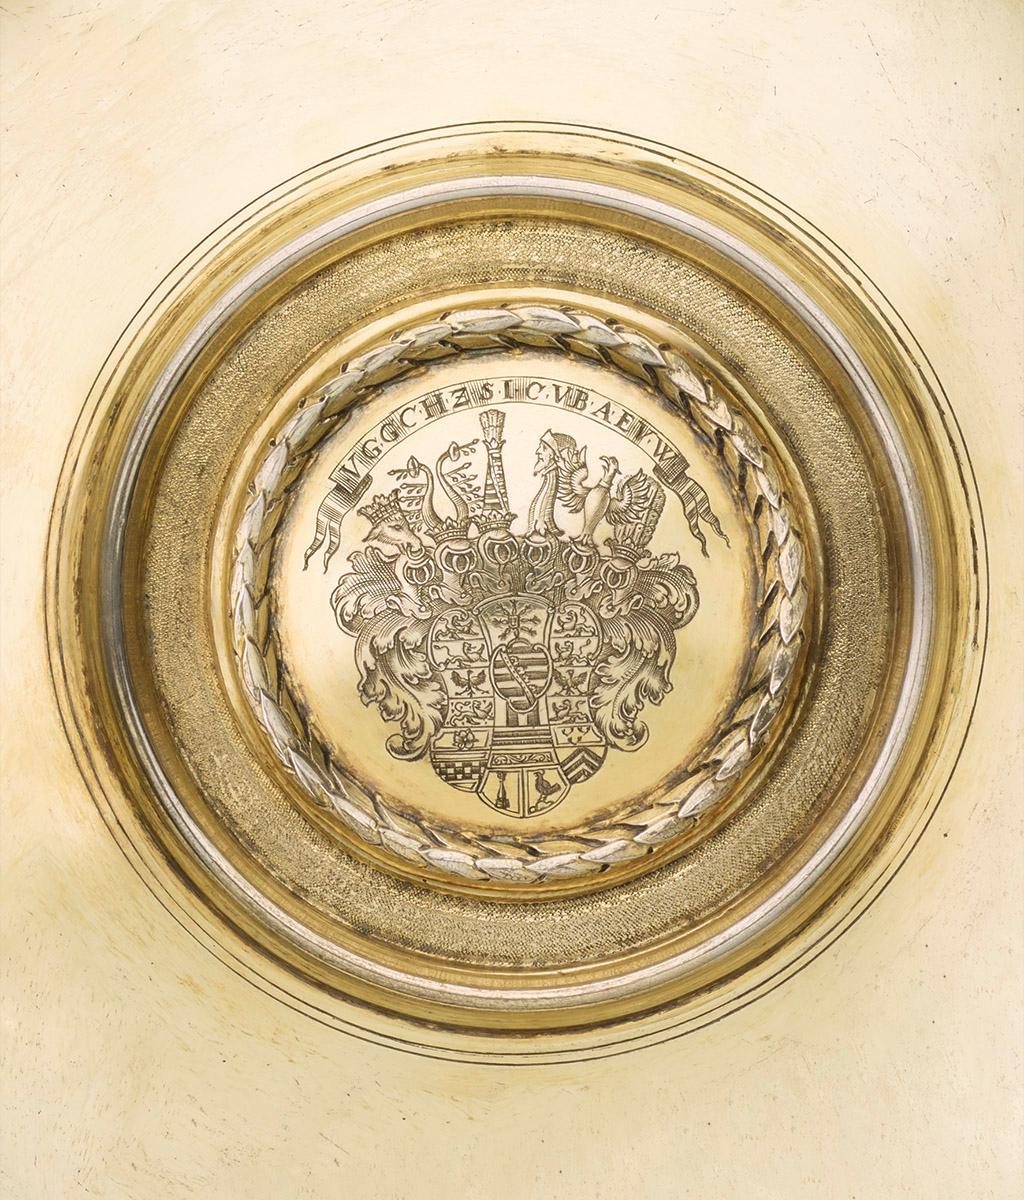 Plate with large coat of arms engraving of Duke Christian of Saxe-Eisenberg
Augsburg, 1690-95
With Augsburg assay and master's mark Albrecht Biller (born 1653, became master about 1681, died 1720, Seling no. 1777).
Extremely high quality silver